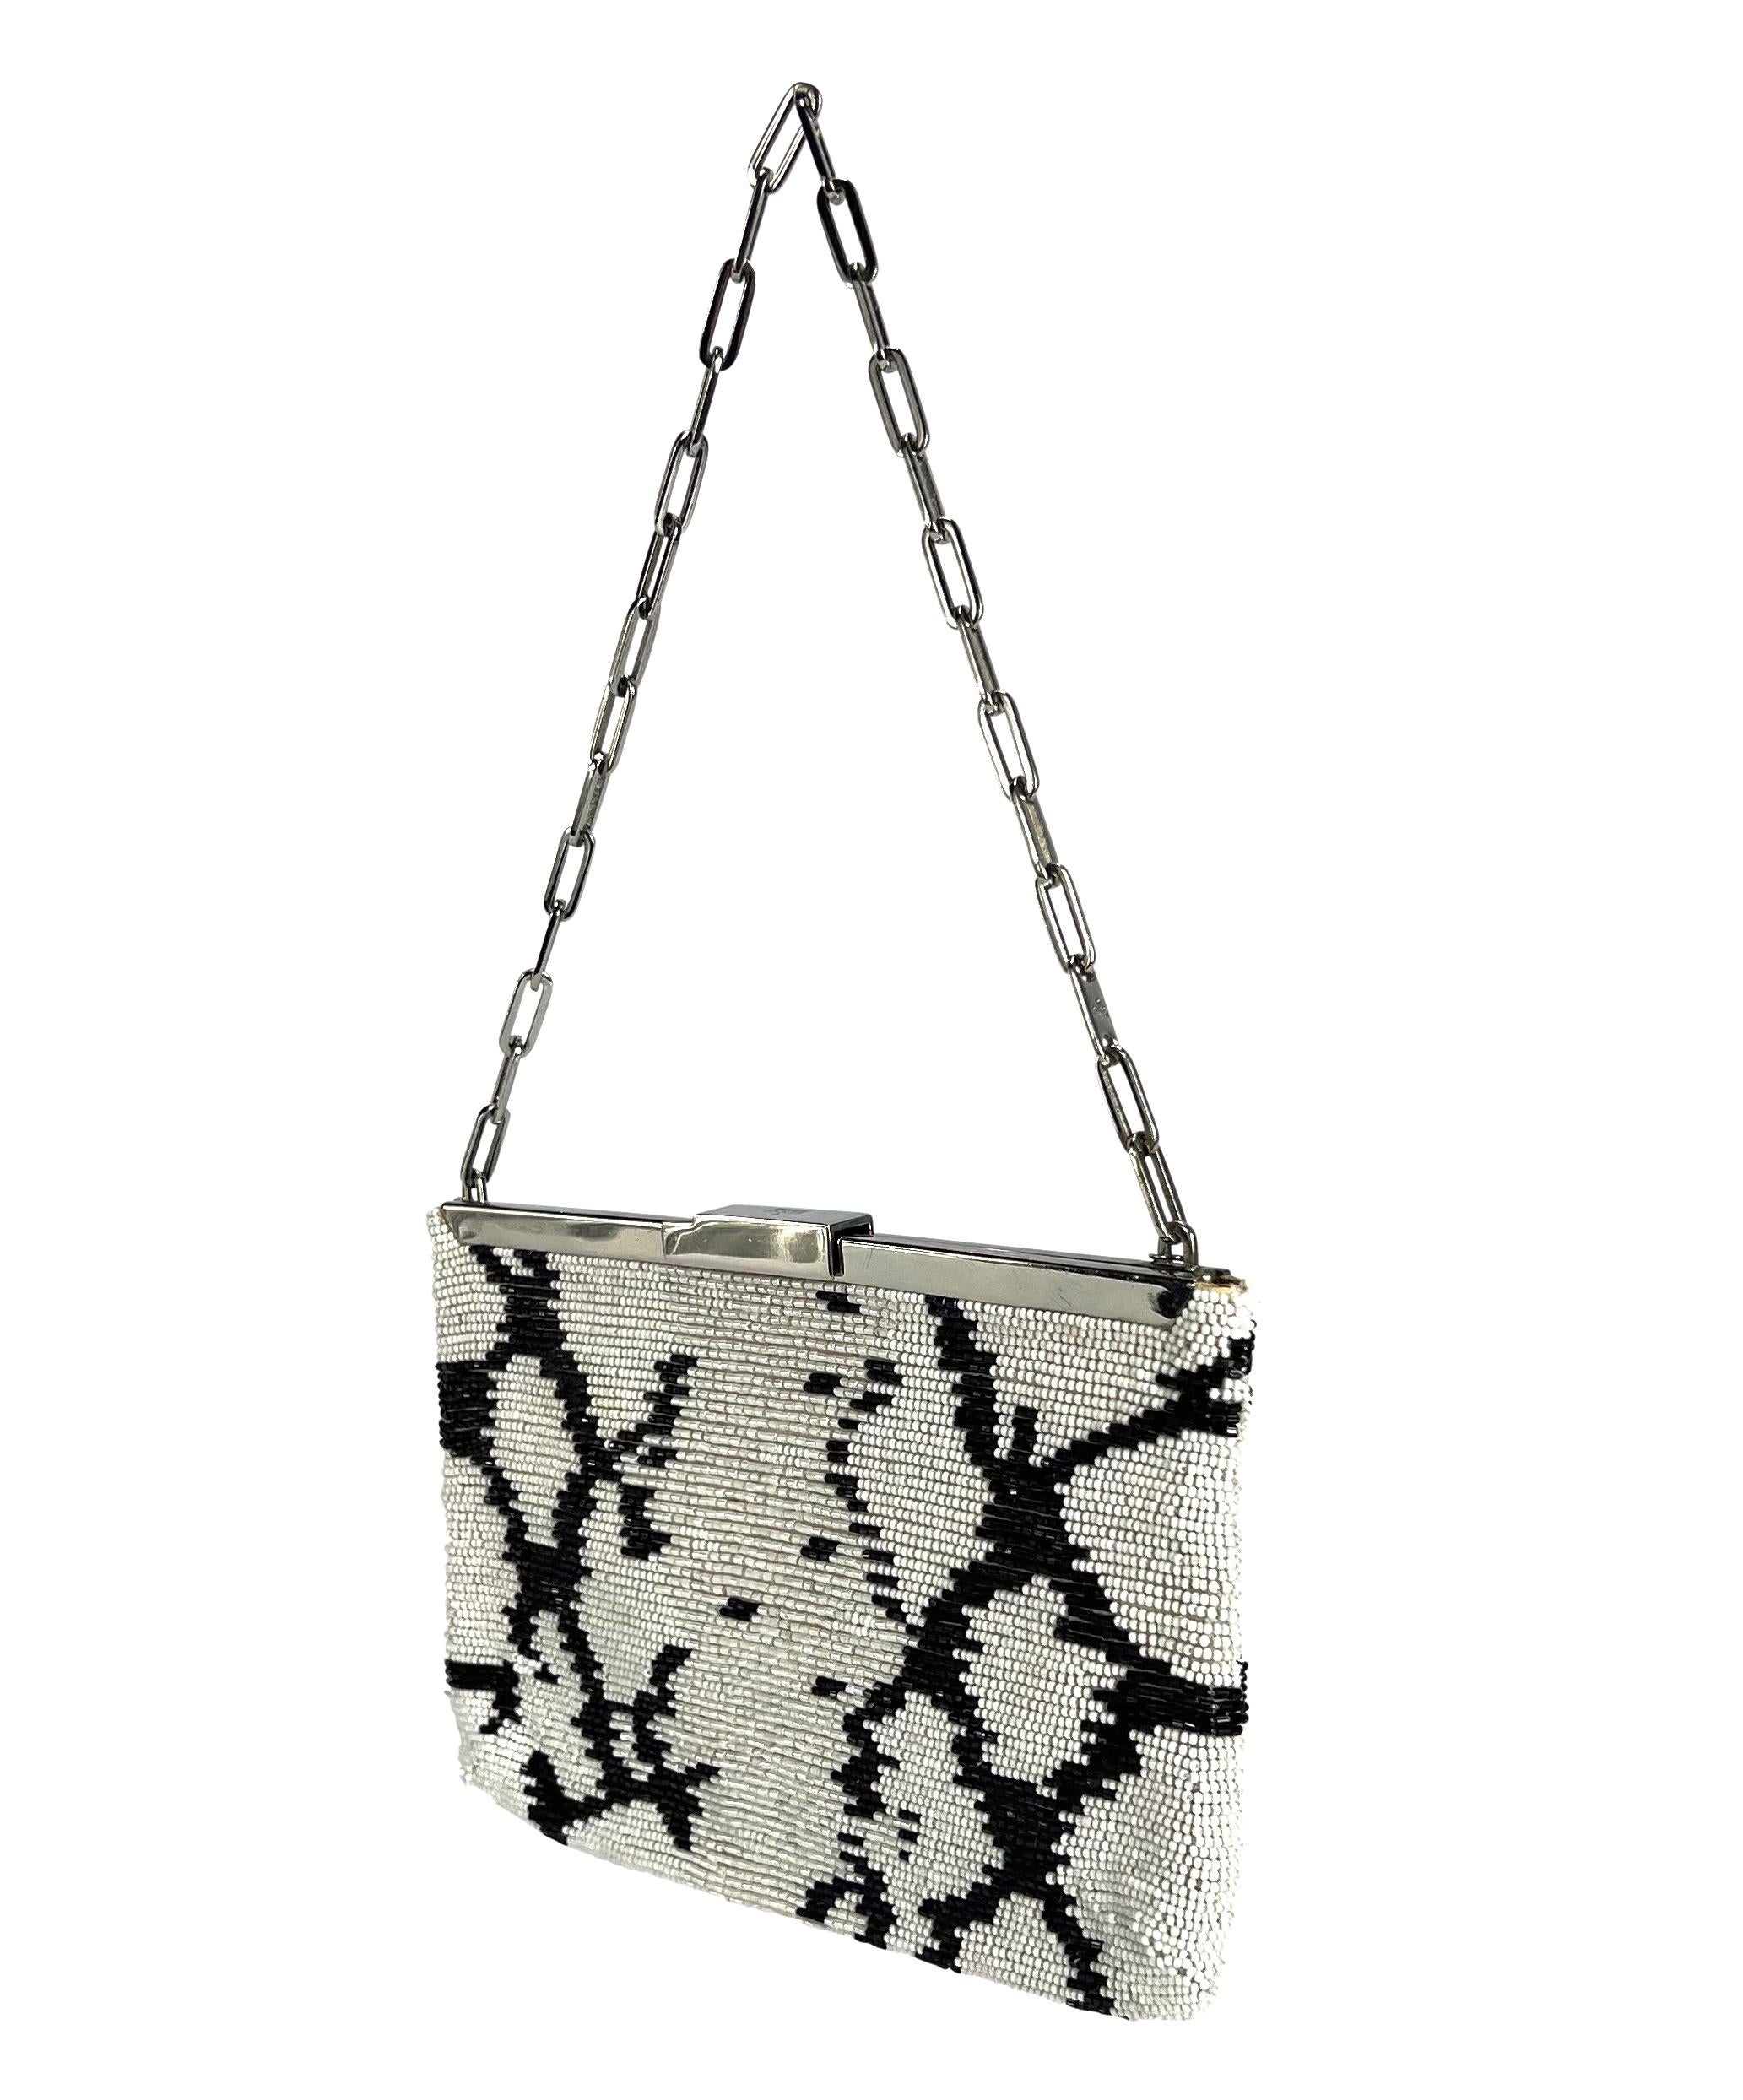 S/S 2000 Gucci by Tom Ford White Beaded Snake Skin Print Chain Bag  In Good Condition For Sale In West Hollywood, CA